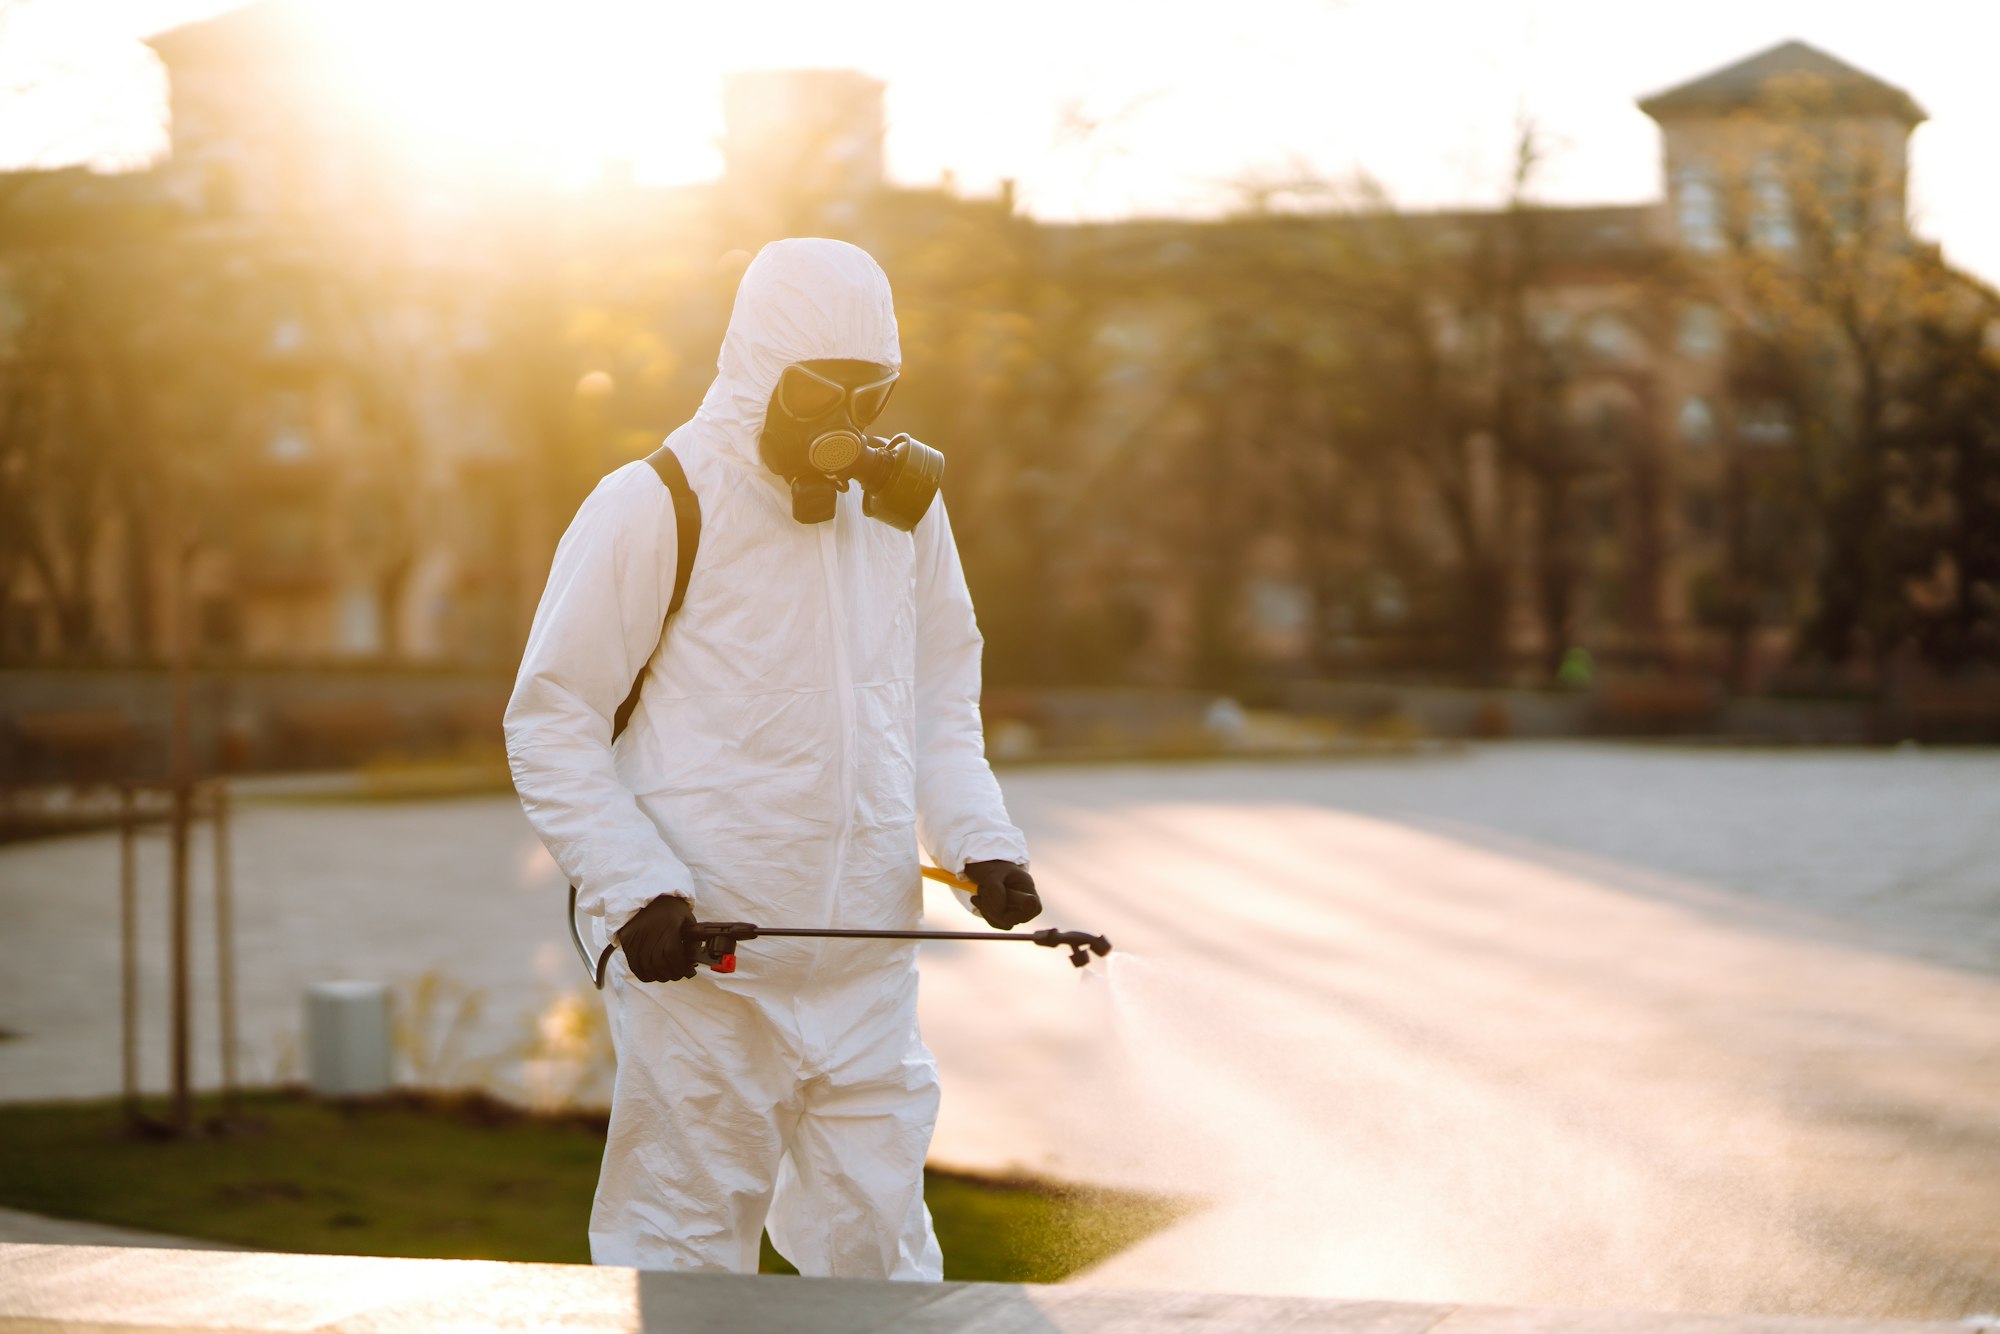 A man wearing special protective disinfection suit sprays sterilizer in the public place. Covid -19.